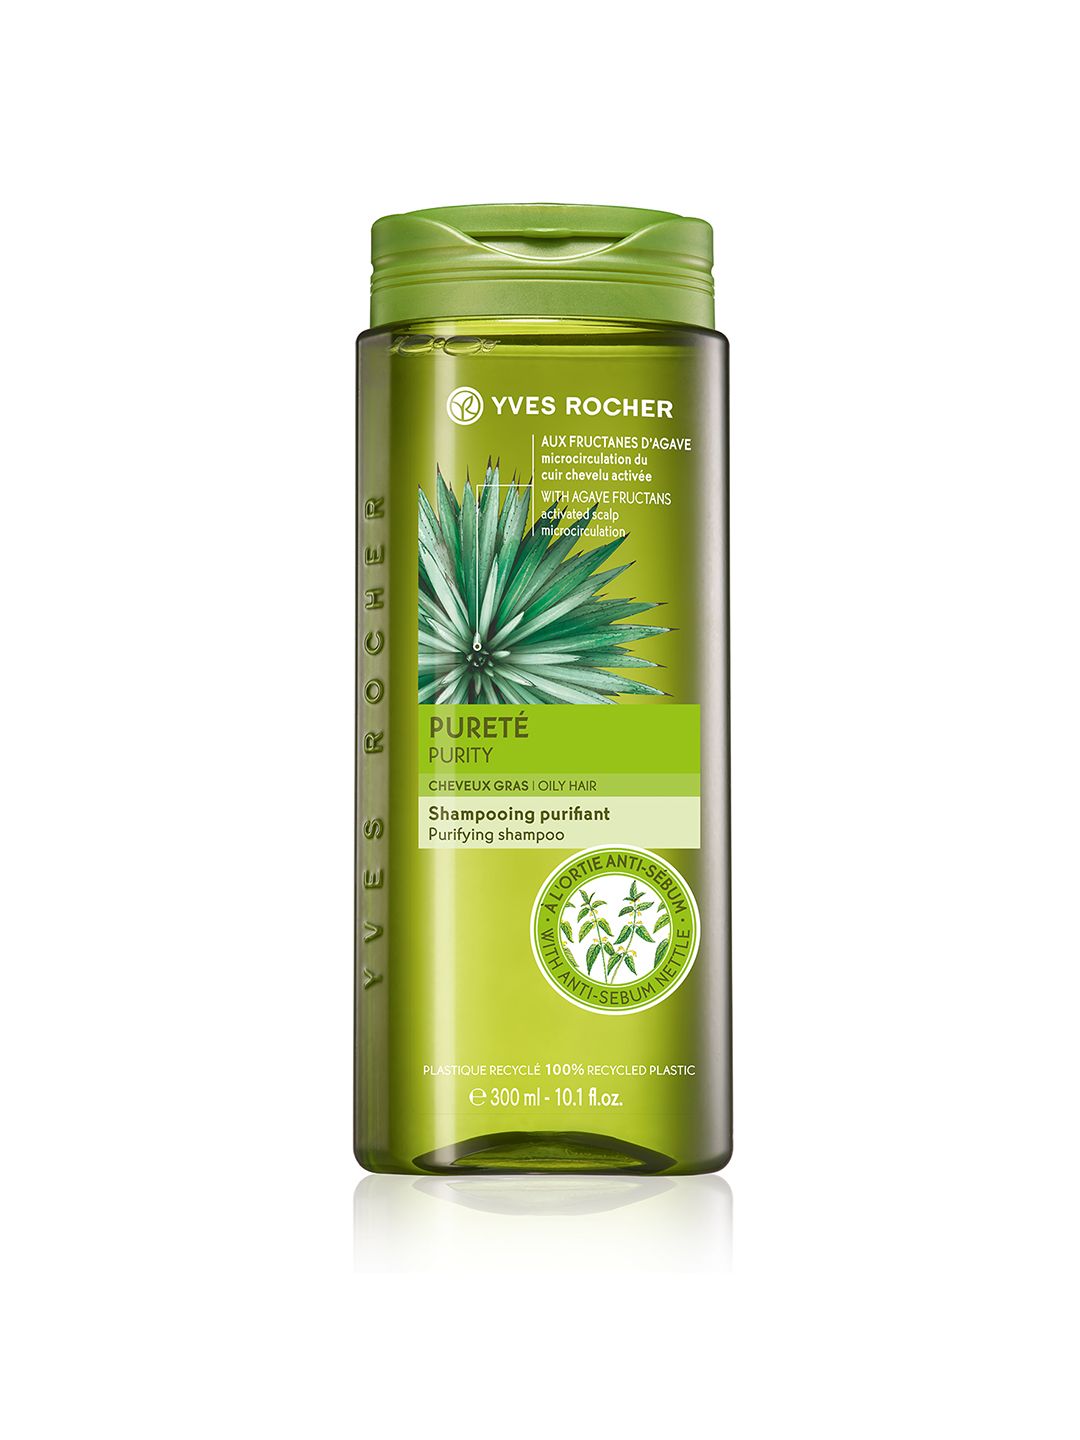 Yves Rocher Unisex Green Purity Purifying Shampoo 300 ml Price in India